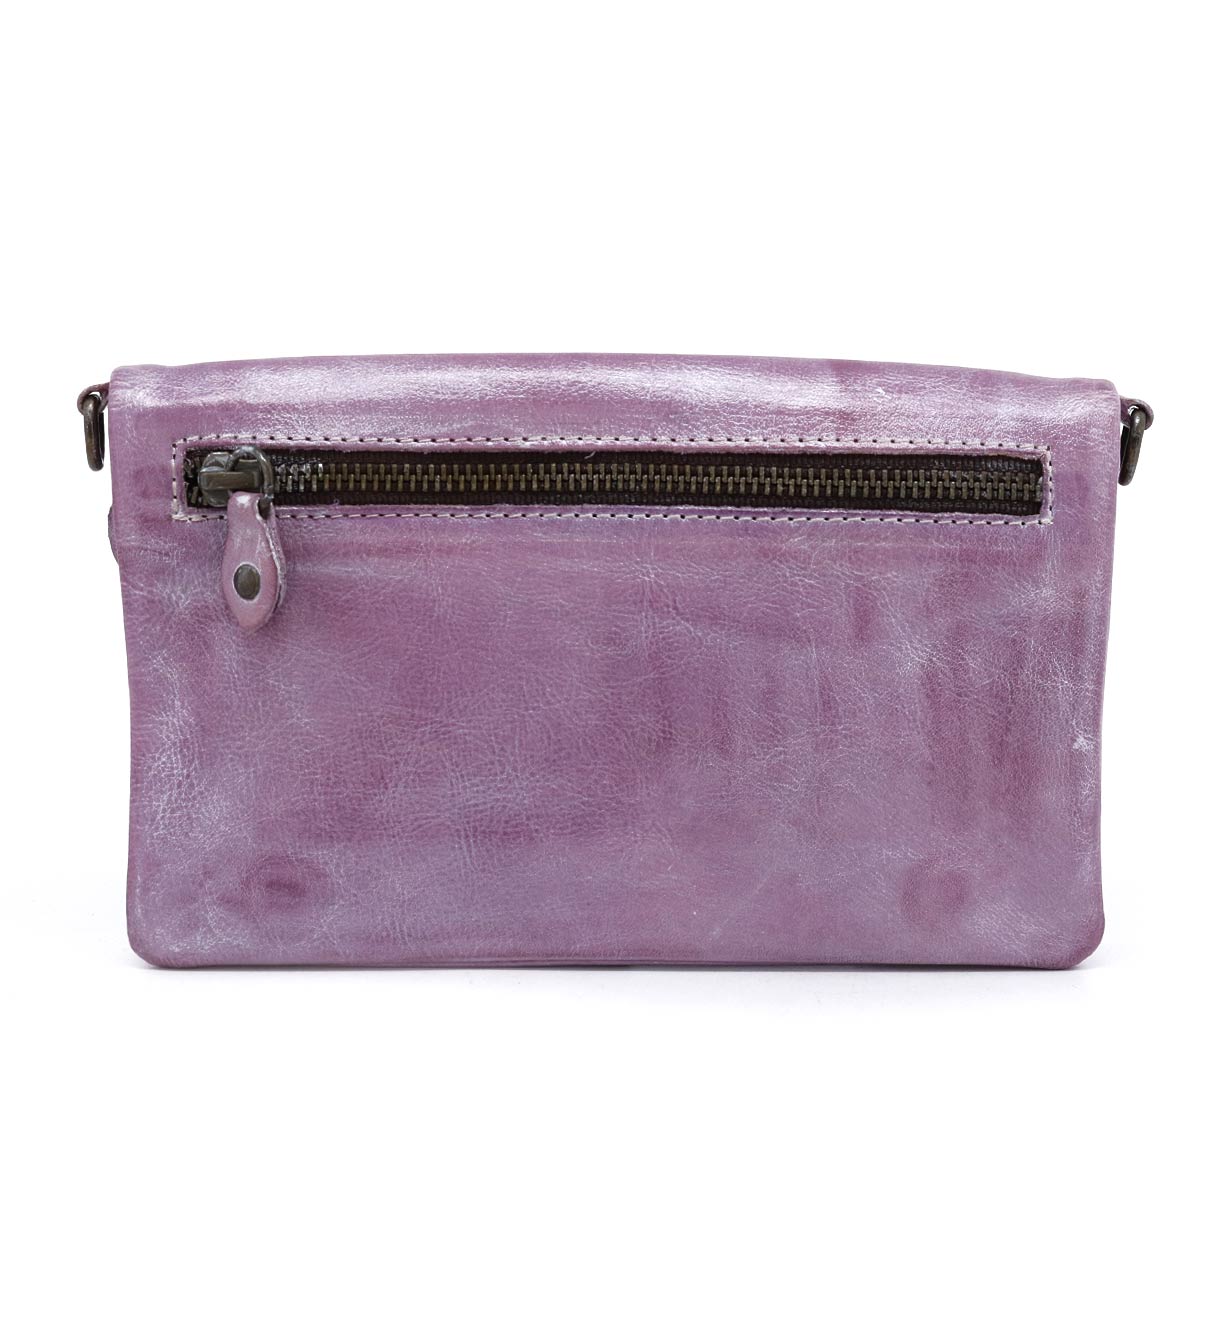 A Cadence clutch bag from Bed Stu.